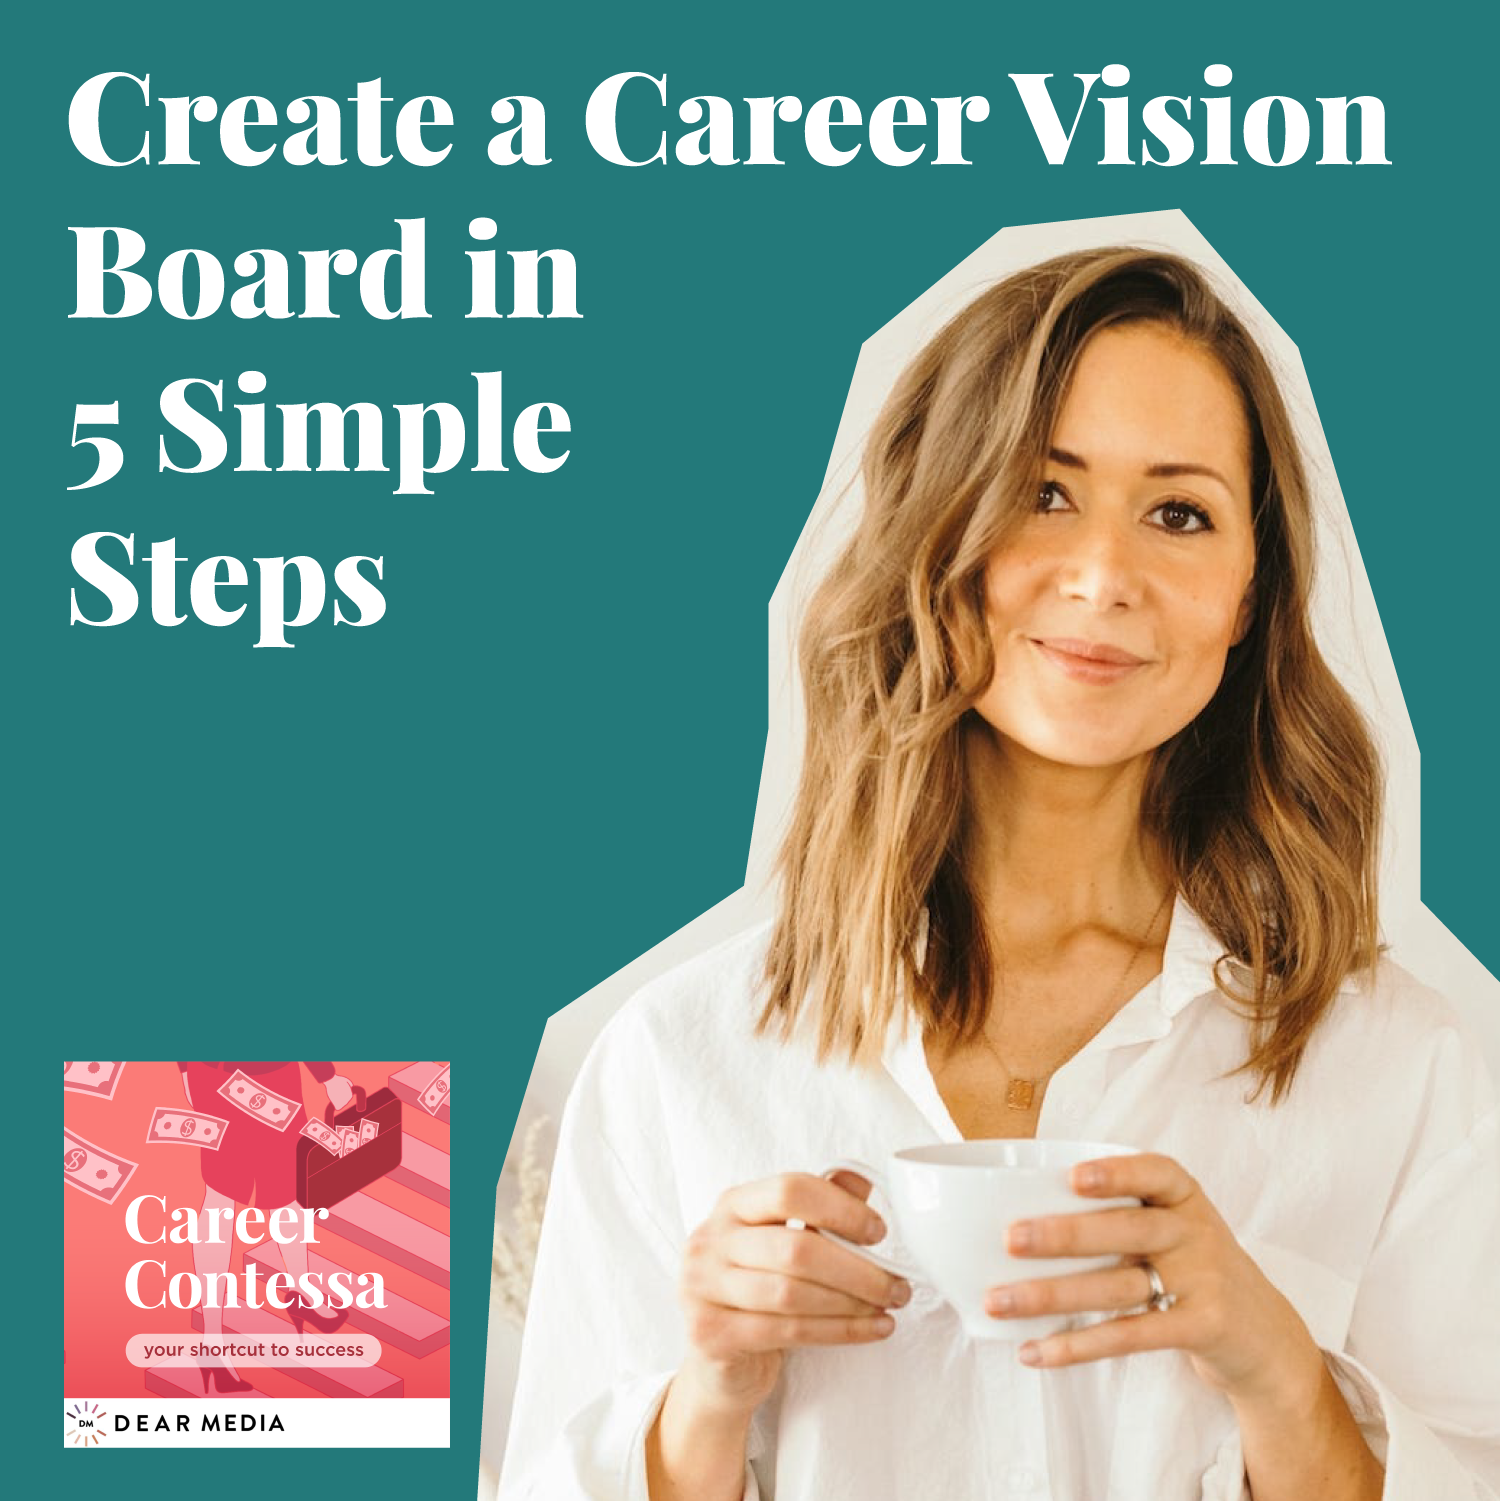 Create a Career Vision Board in 5 Simple Steps Image